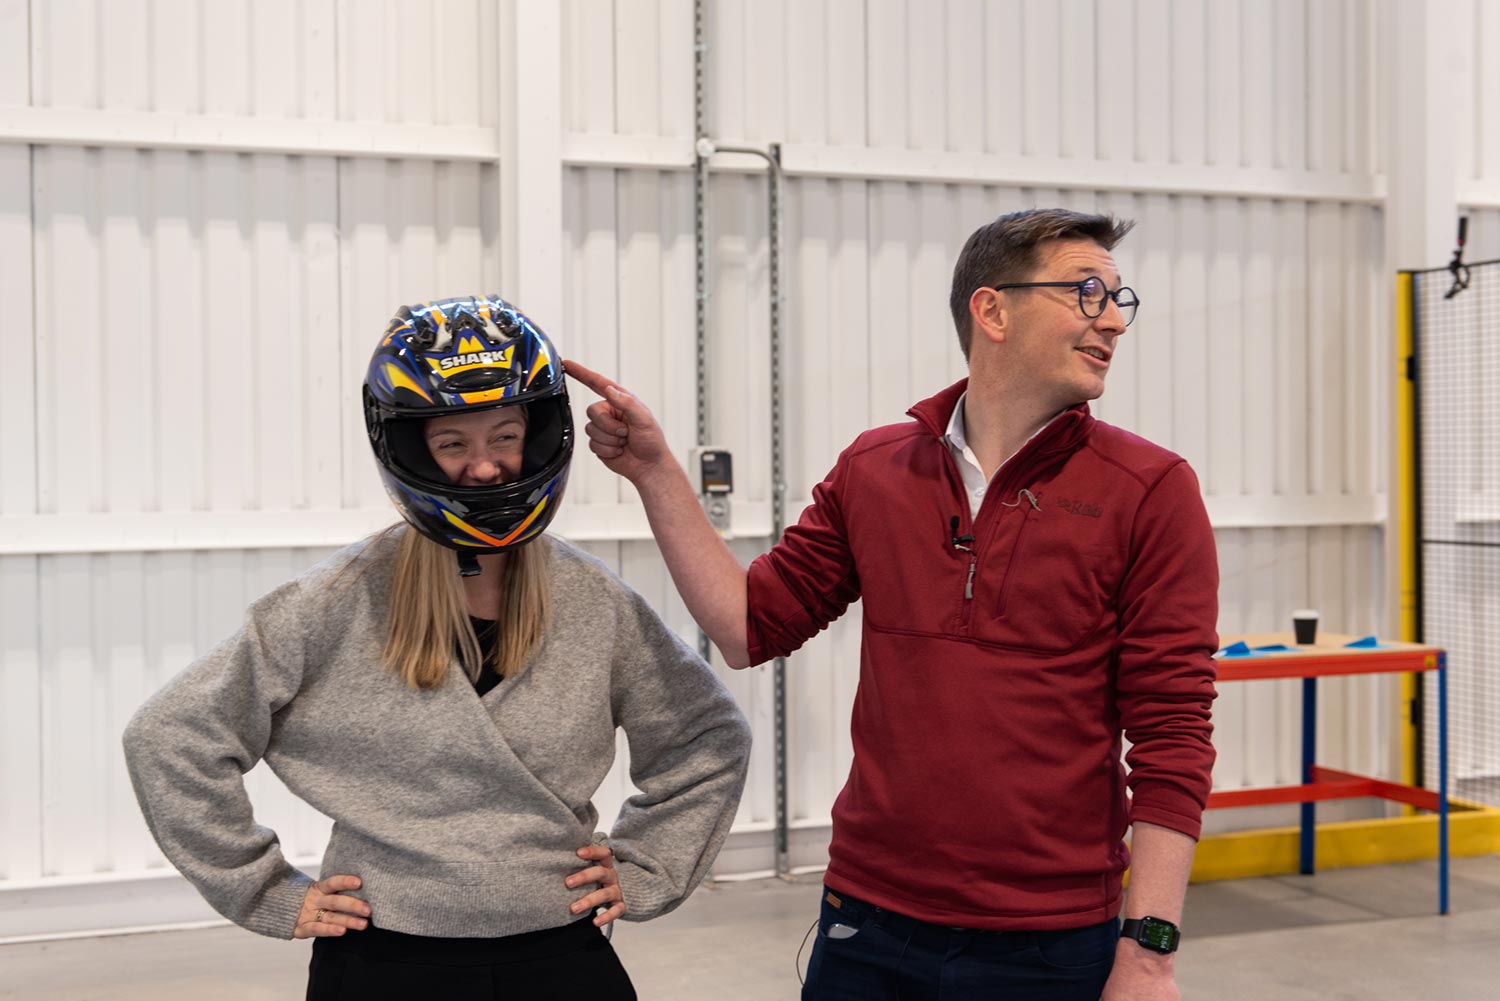 Woman laughing while wearing crash helmet and man beside her points to her head.